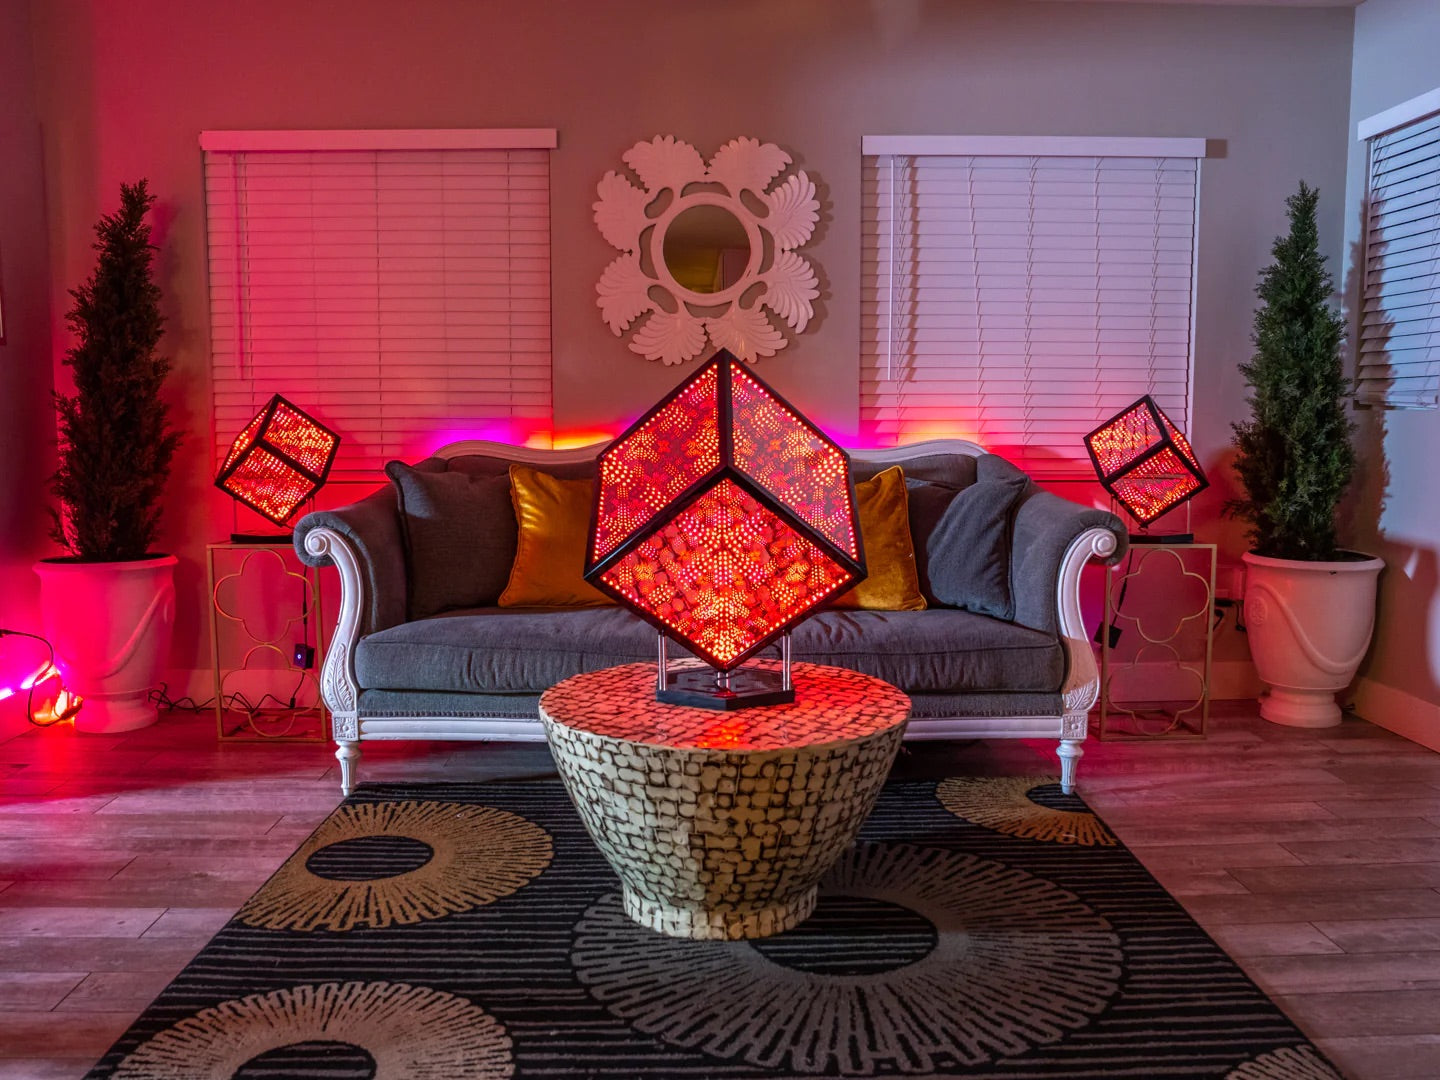 Living room with a couch in the middle of two windows, a circle-patterned rug, and a table with a HyperCube on top of it as a centerpiece decorative lighting ideas